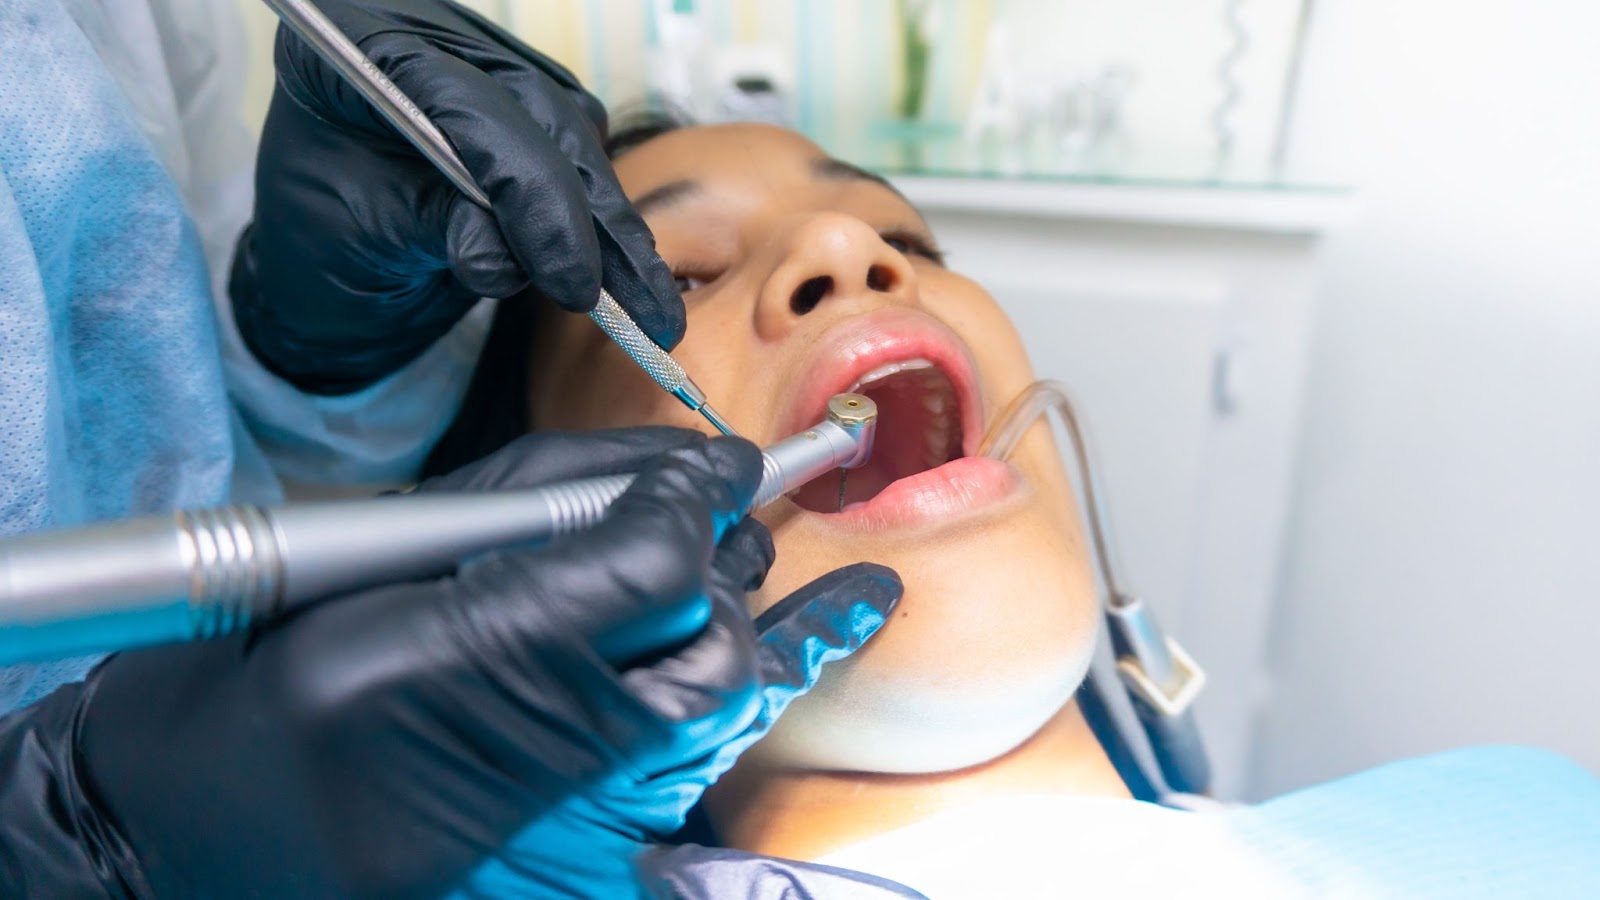 a close up of a patient receiving dental work, and a hygienist cleaning her teeth with dental instruments